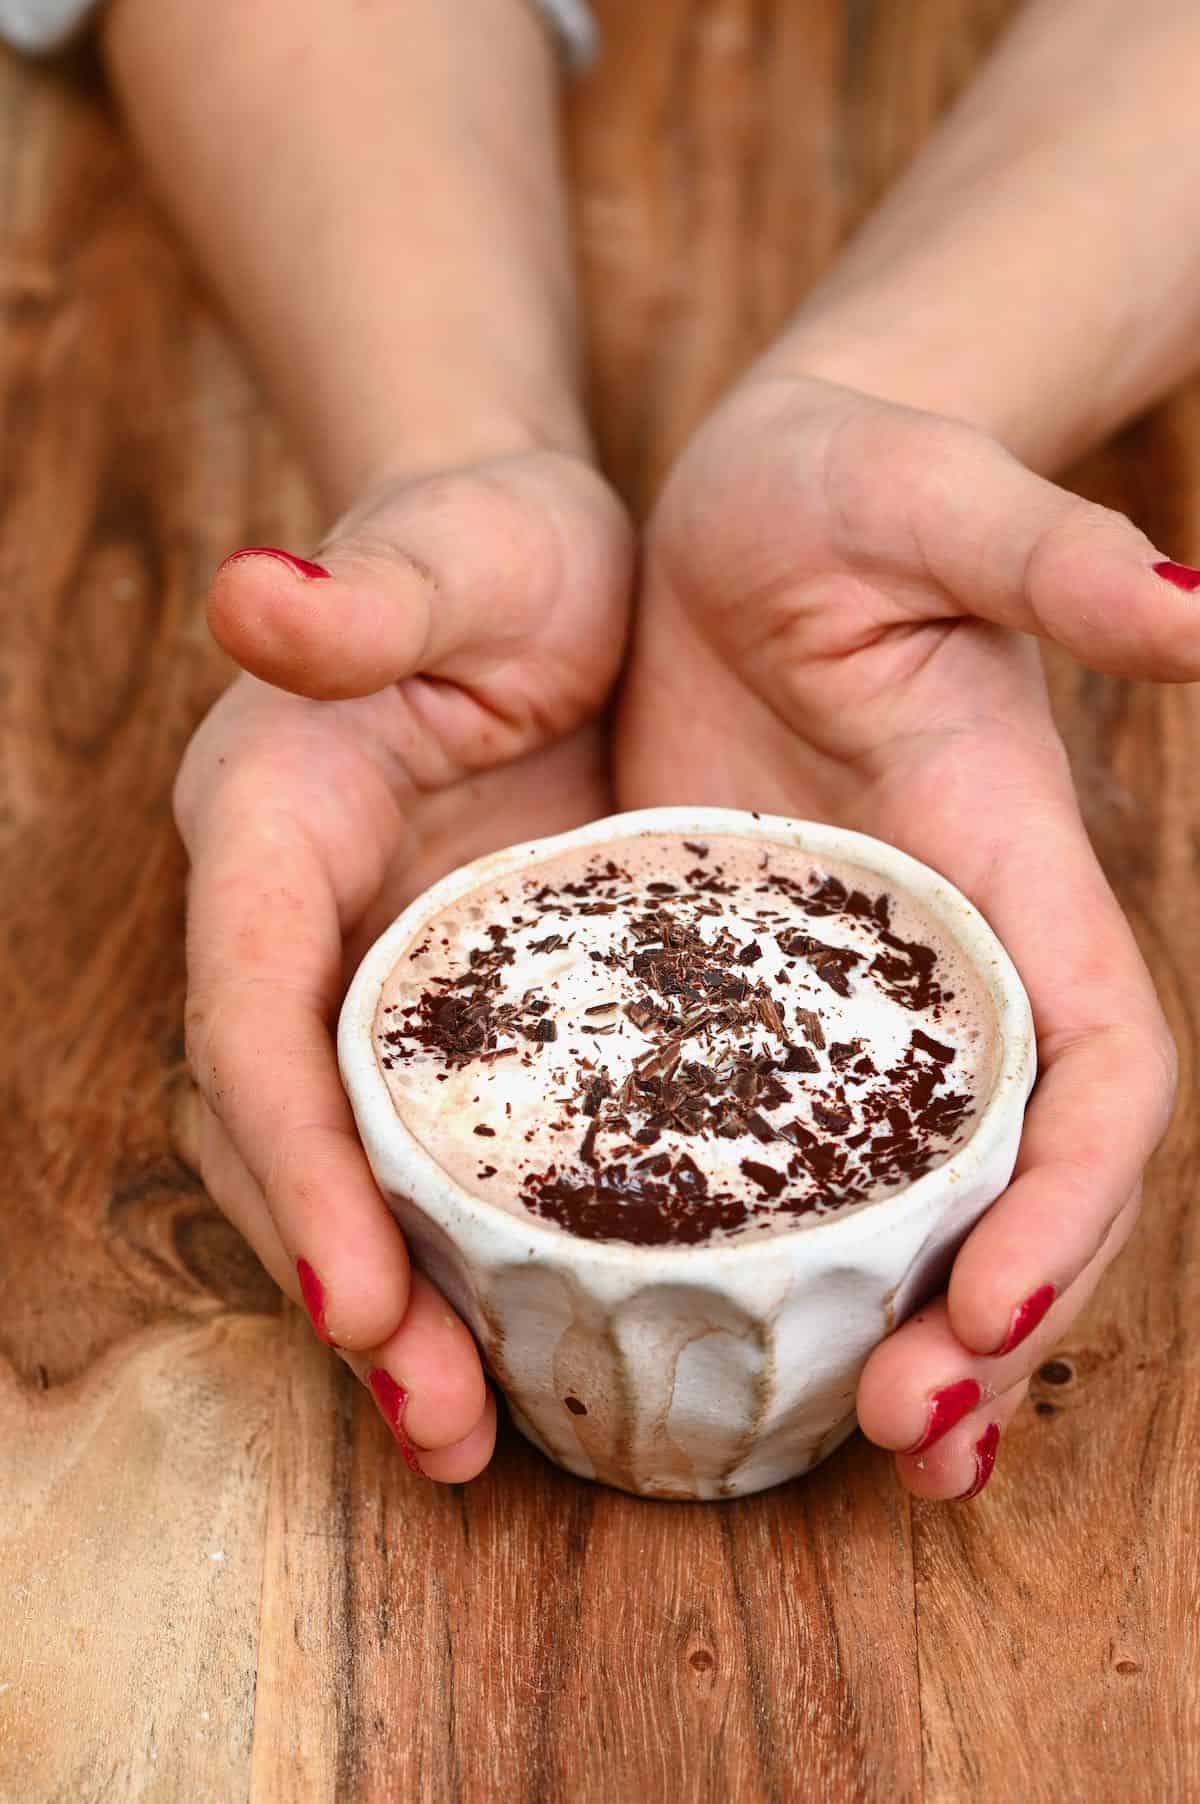 Hands holding a small cup with hot chocolate